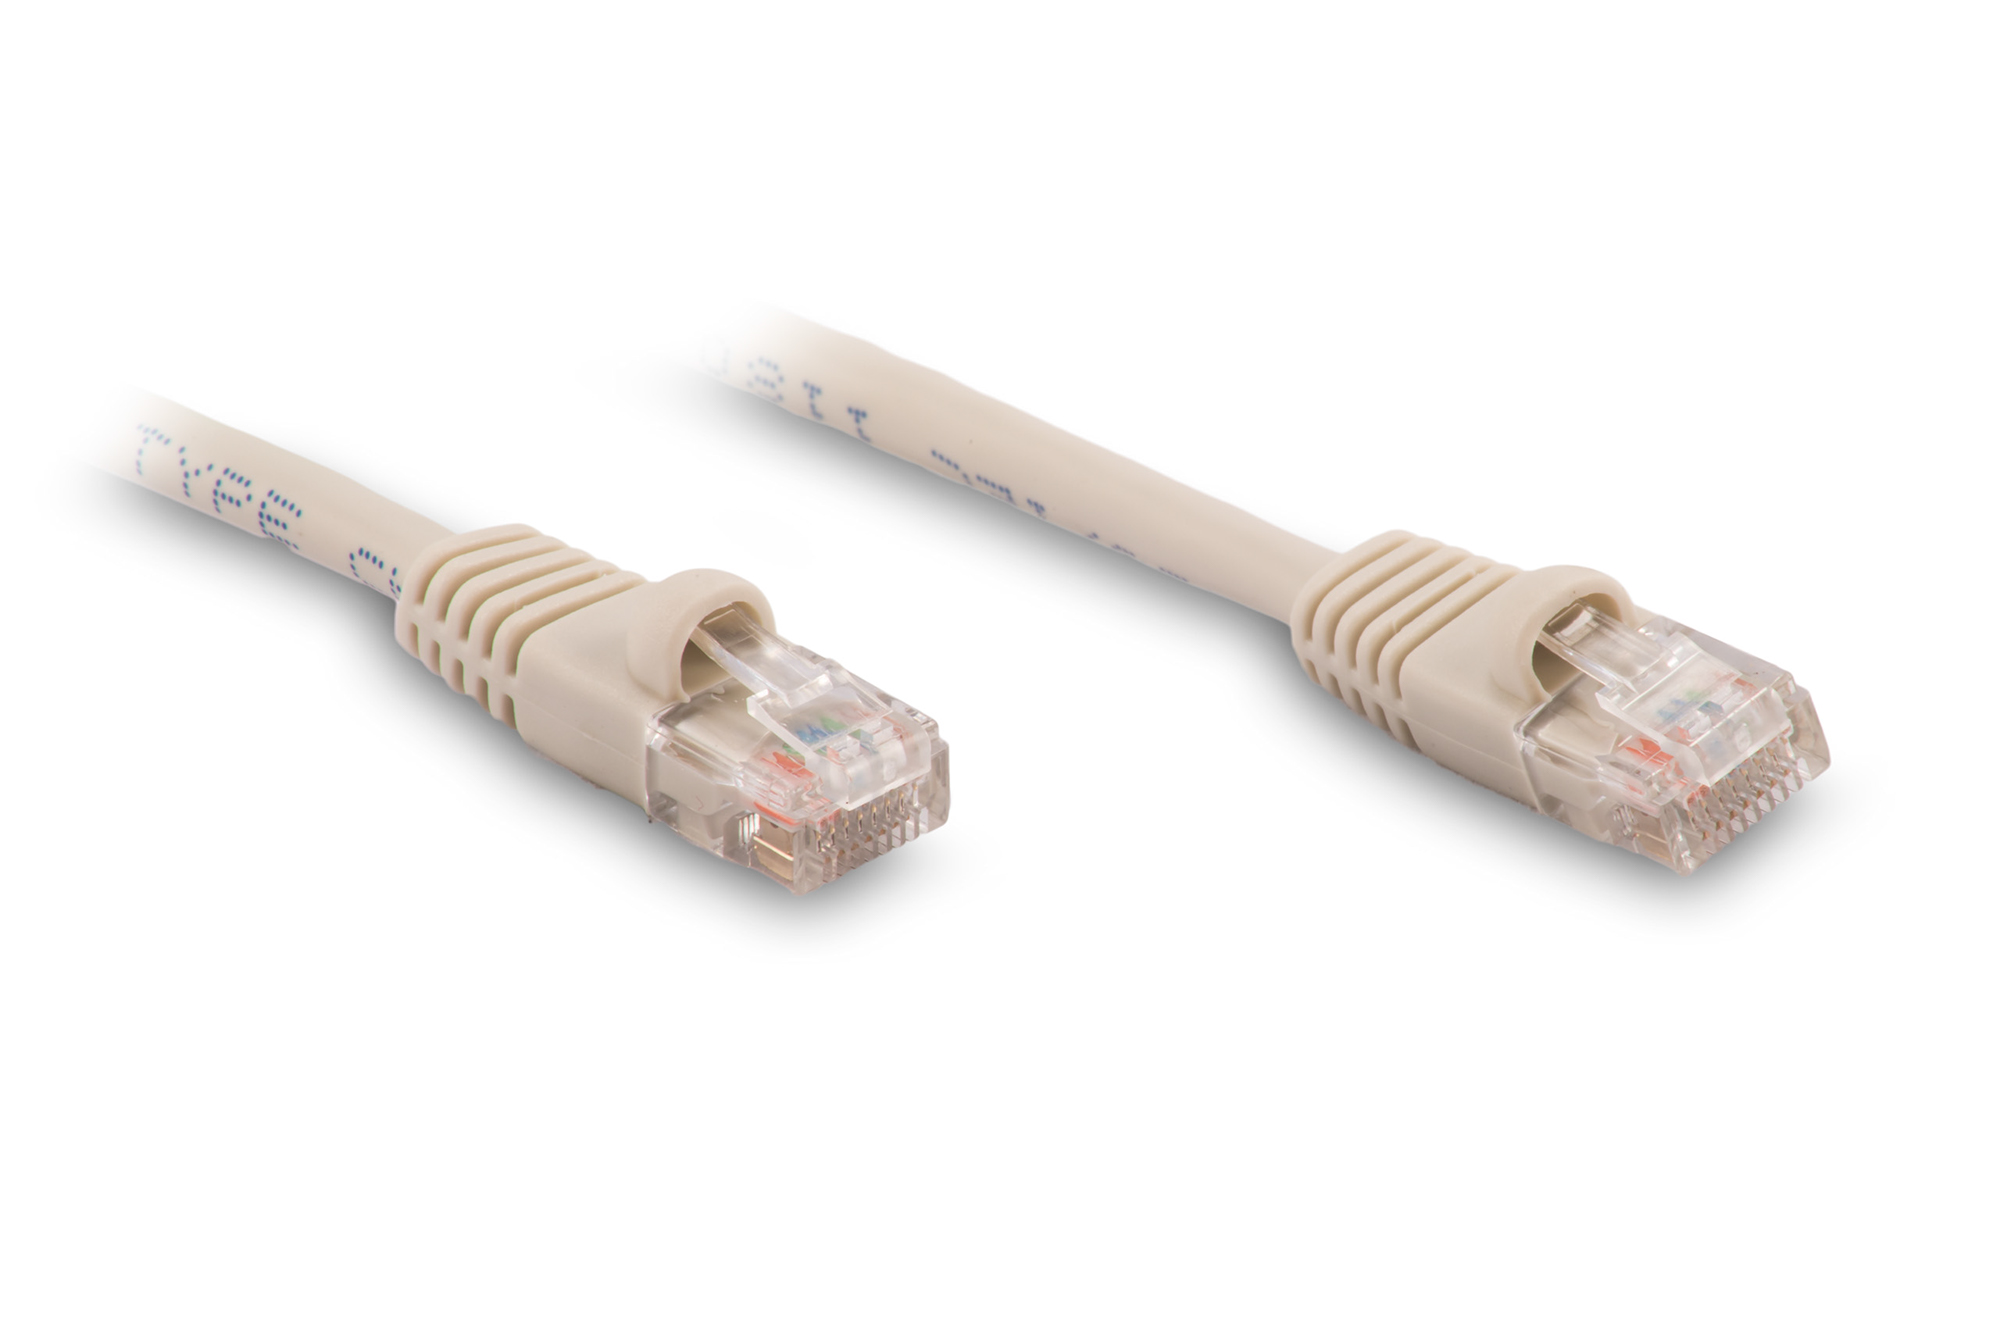 5ft Cat6 Ethernet Patch Cable - Gray Color - Snagless Boot